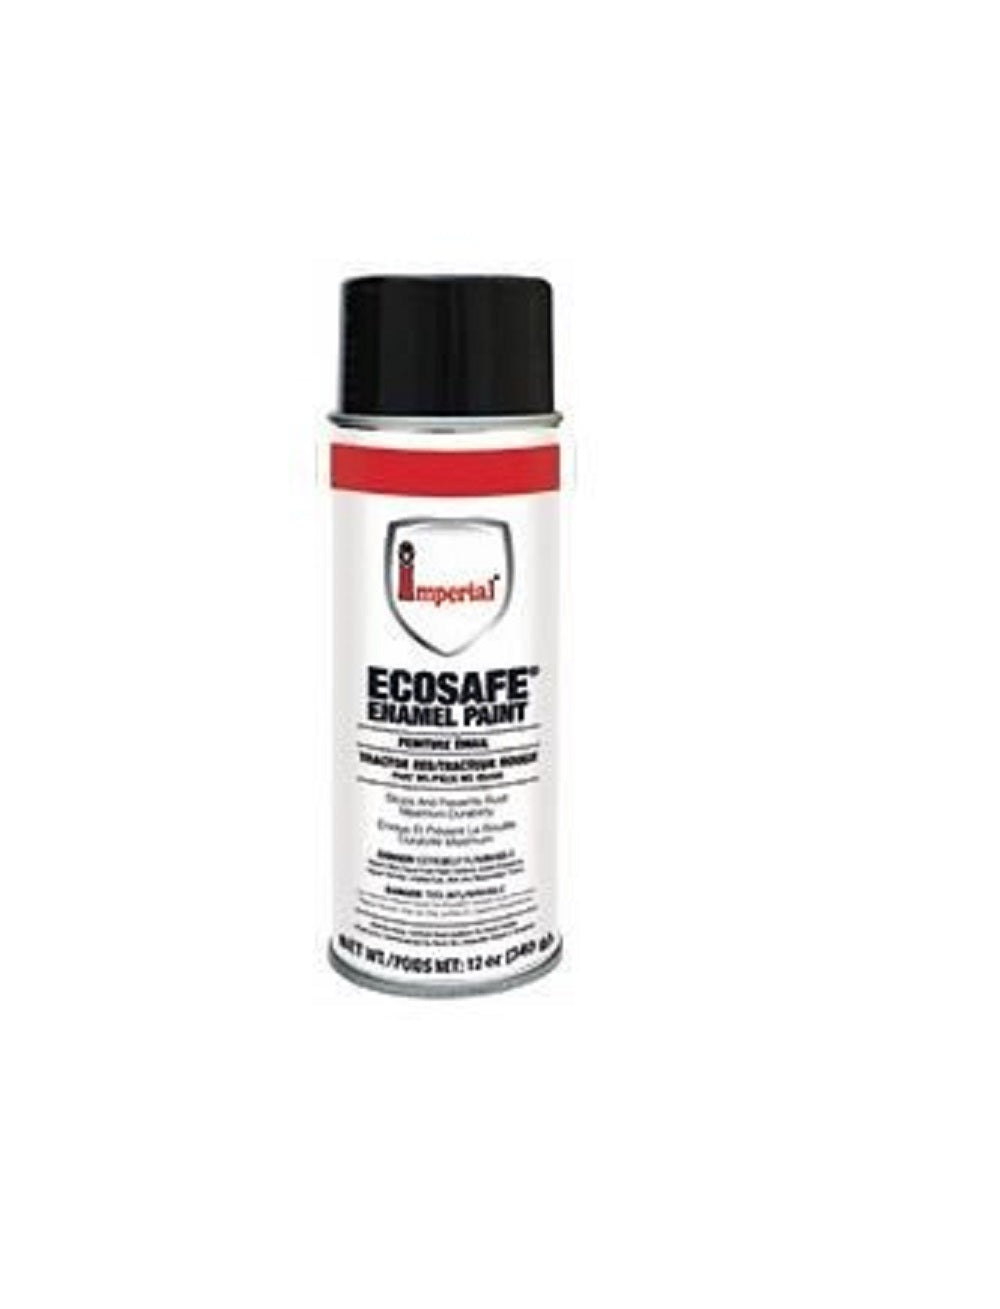 buy rust preventative spray paint at cheap rate in bulk. wholesale & retail painting gadgets & tools store. home décor ideas, maintenance, repair replacement parts